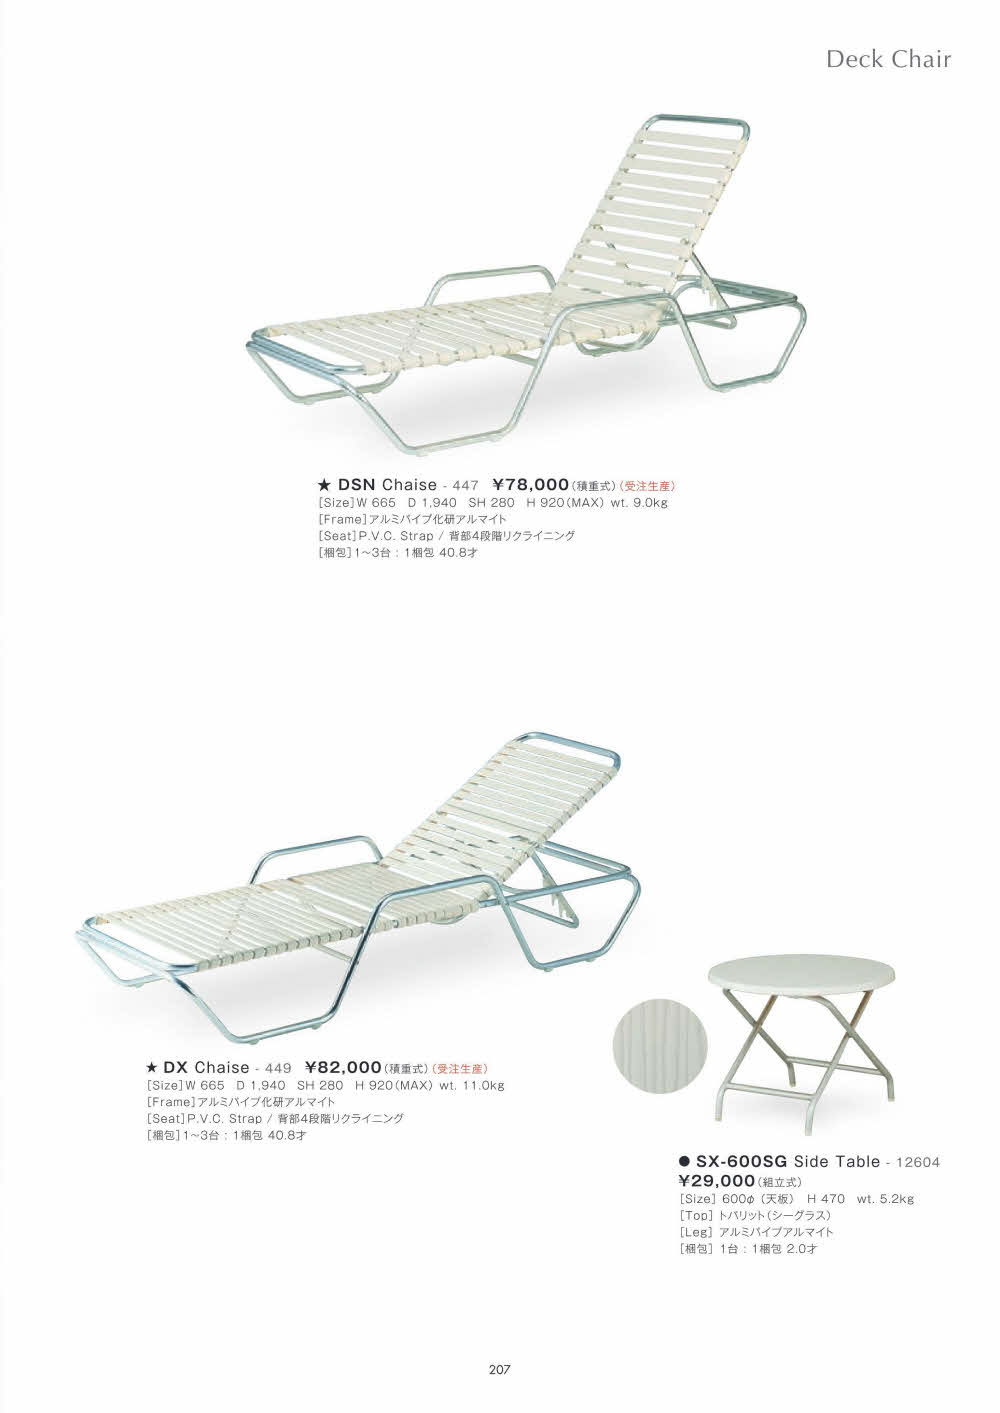 DSN Chaise